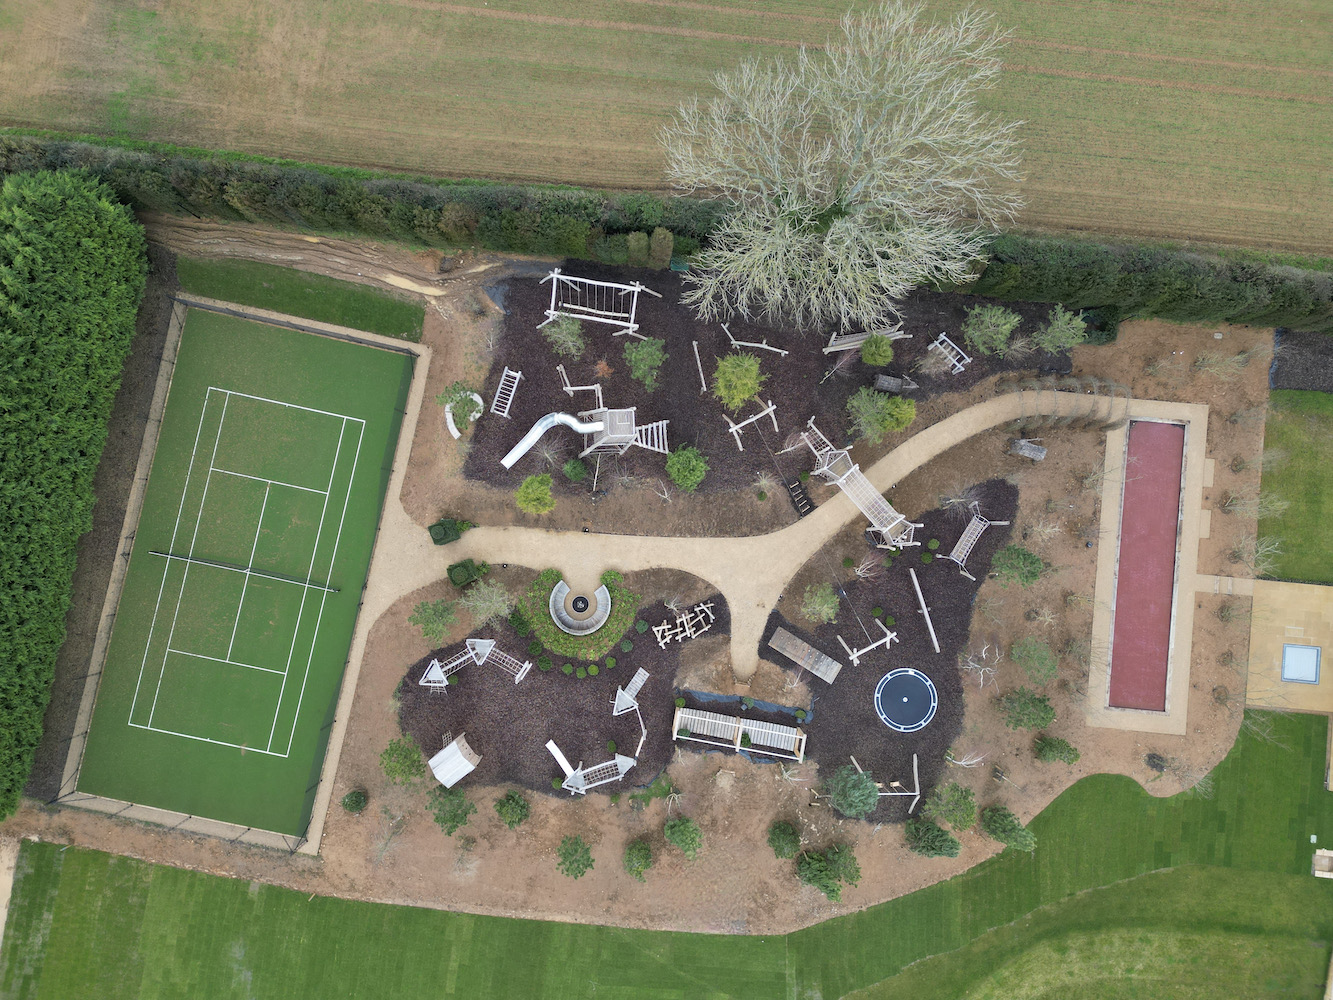 Ariel drone shot of Playscape at Sibford Park, hendy curzon gardens